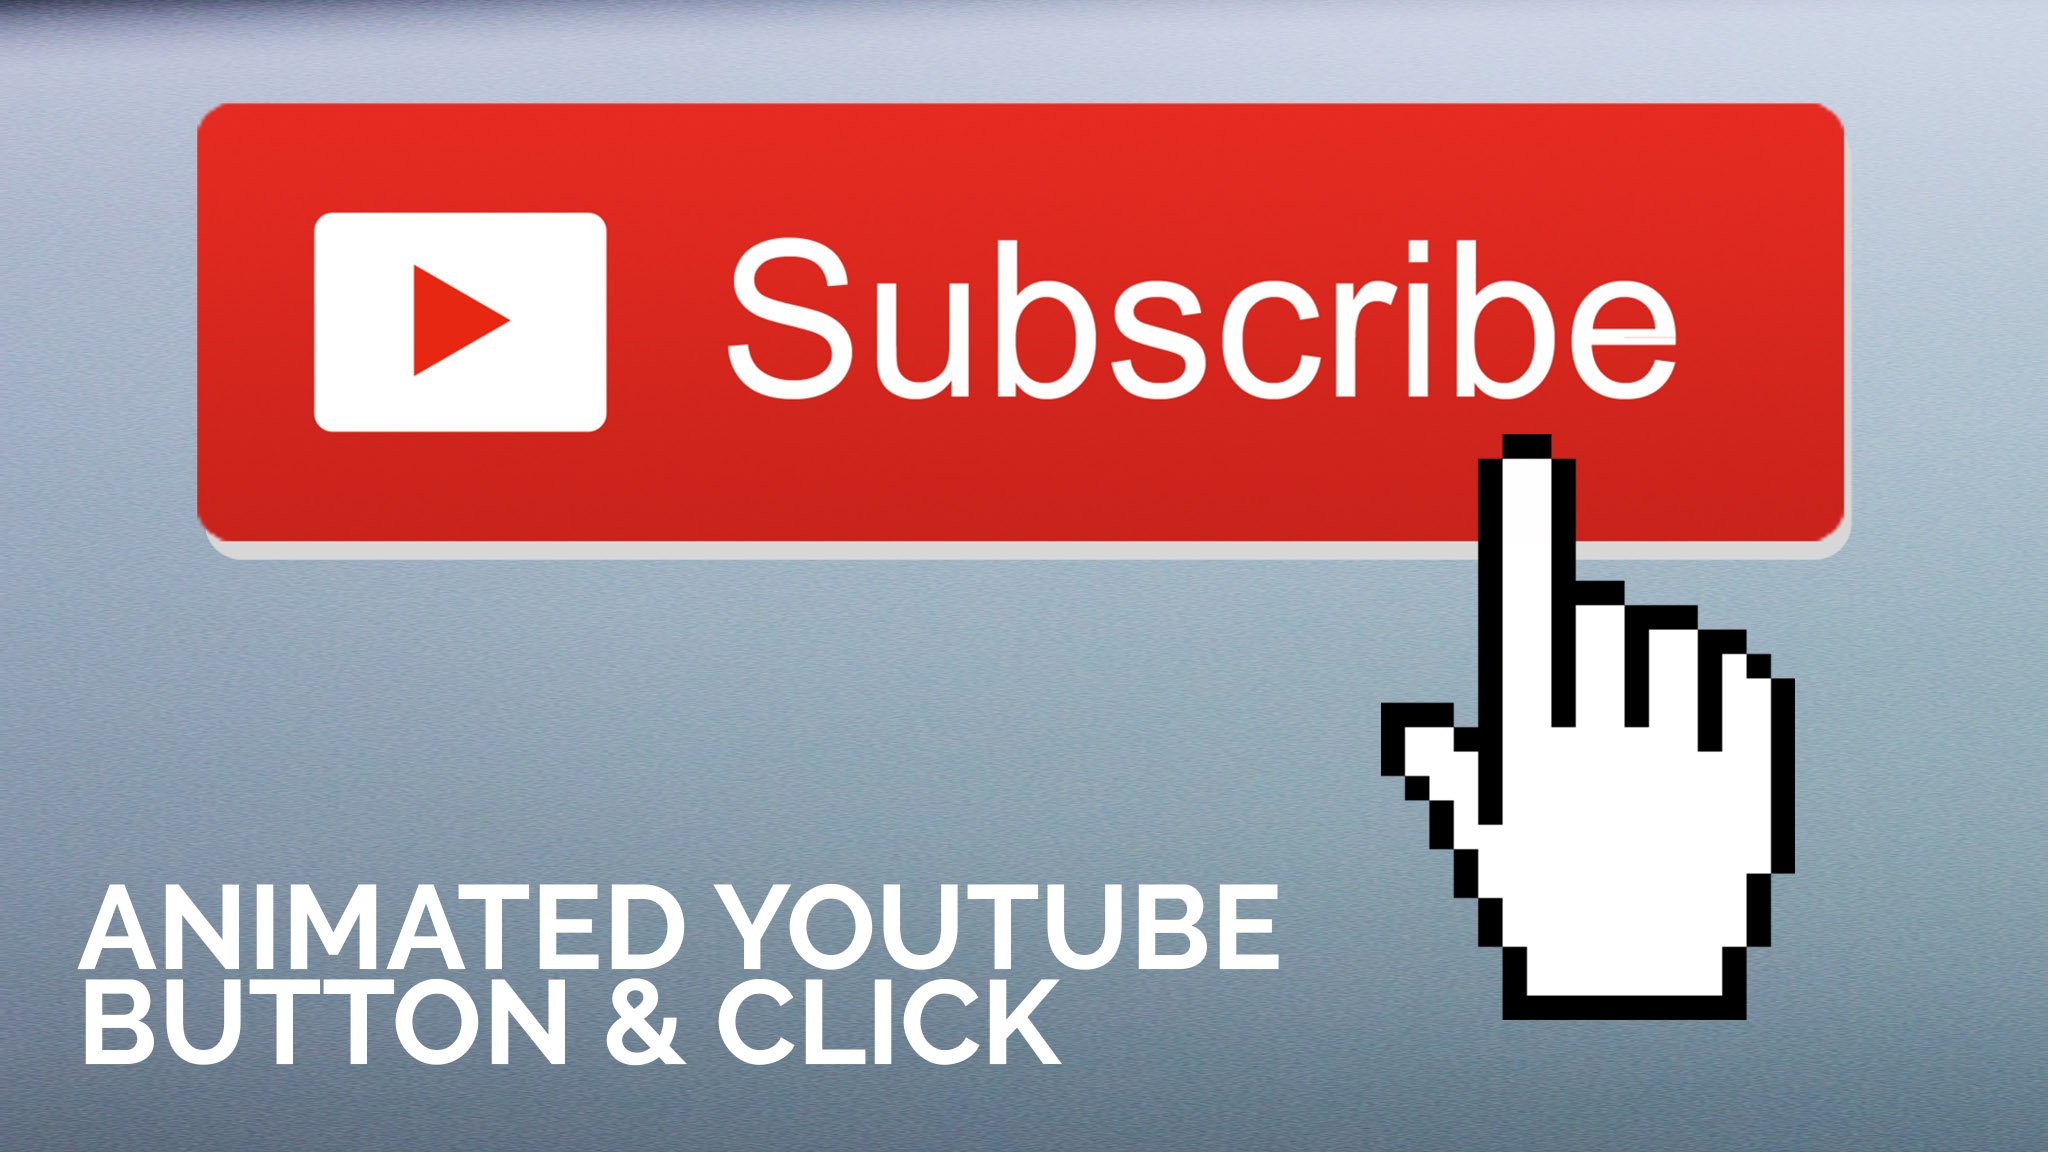 subscribe youtube banner 2048 x 1152